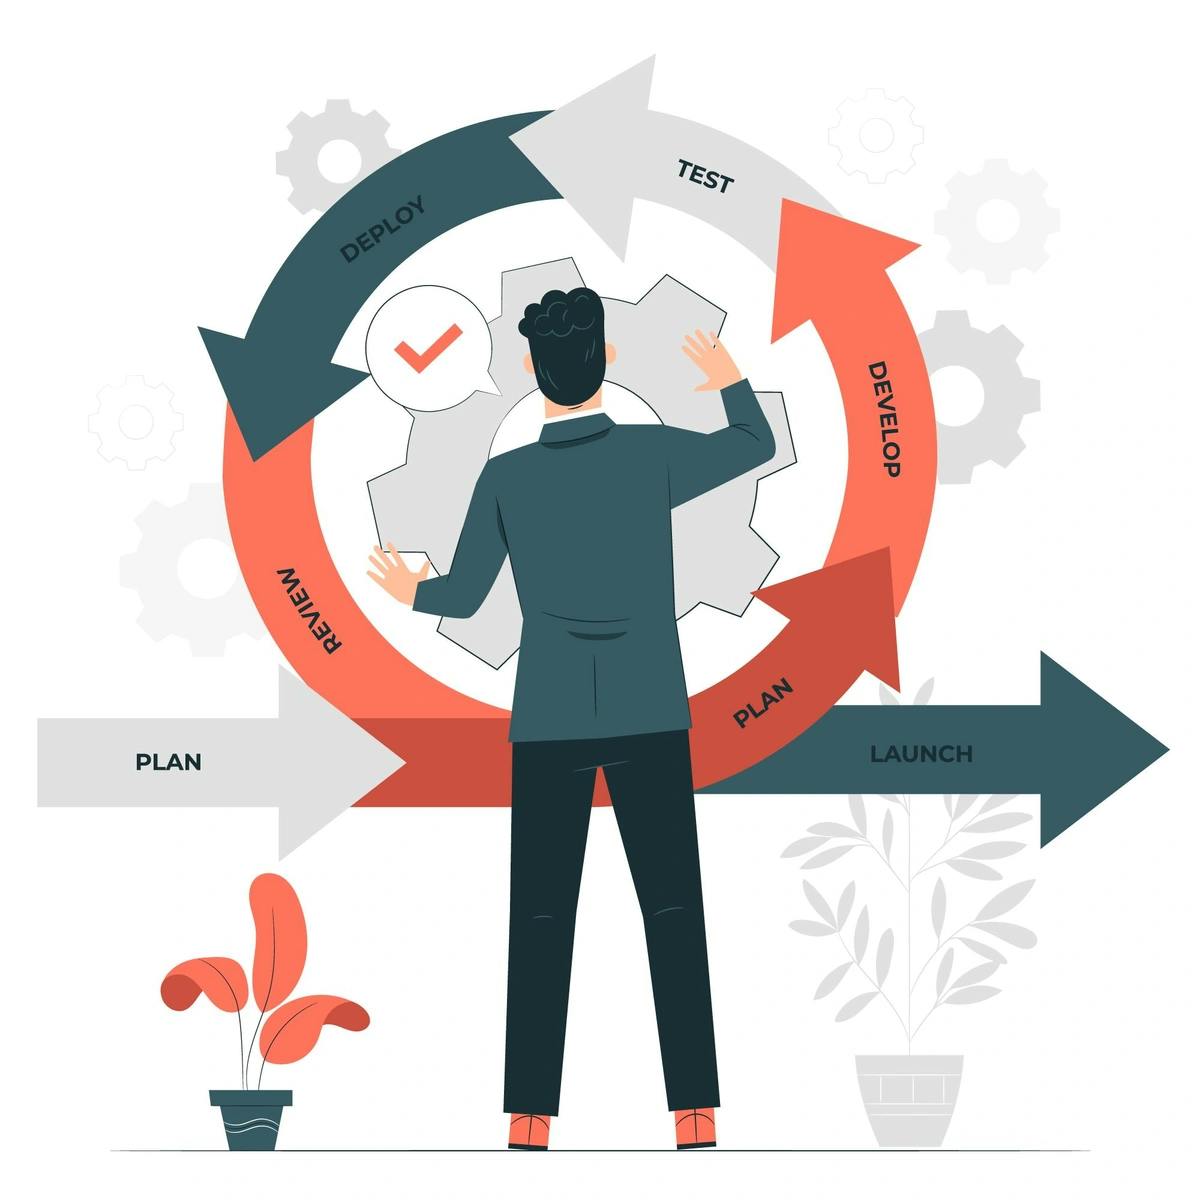 A graphic of a person interacting with a circular workflow diagram that includes stages such as plan, develop, test, deploy, and launch, indicating a project lifecycle or product development process, with a focus on strategy and planning in a busines